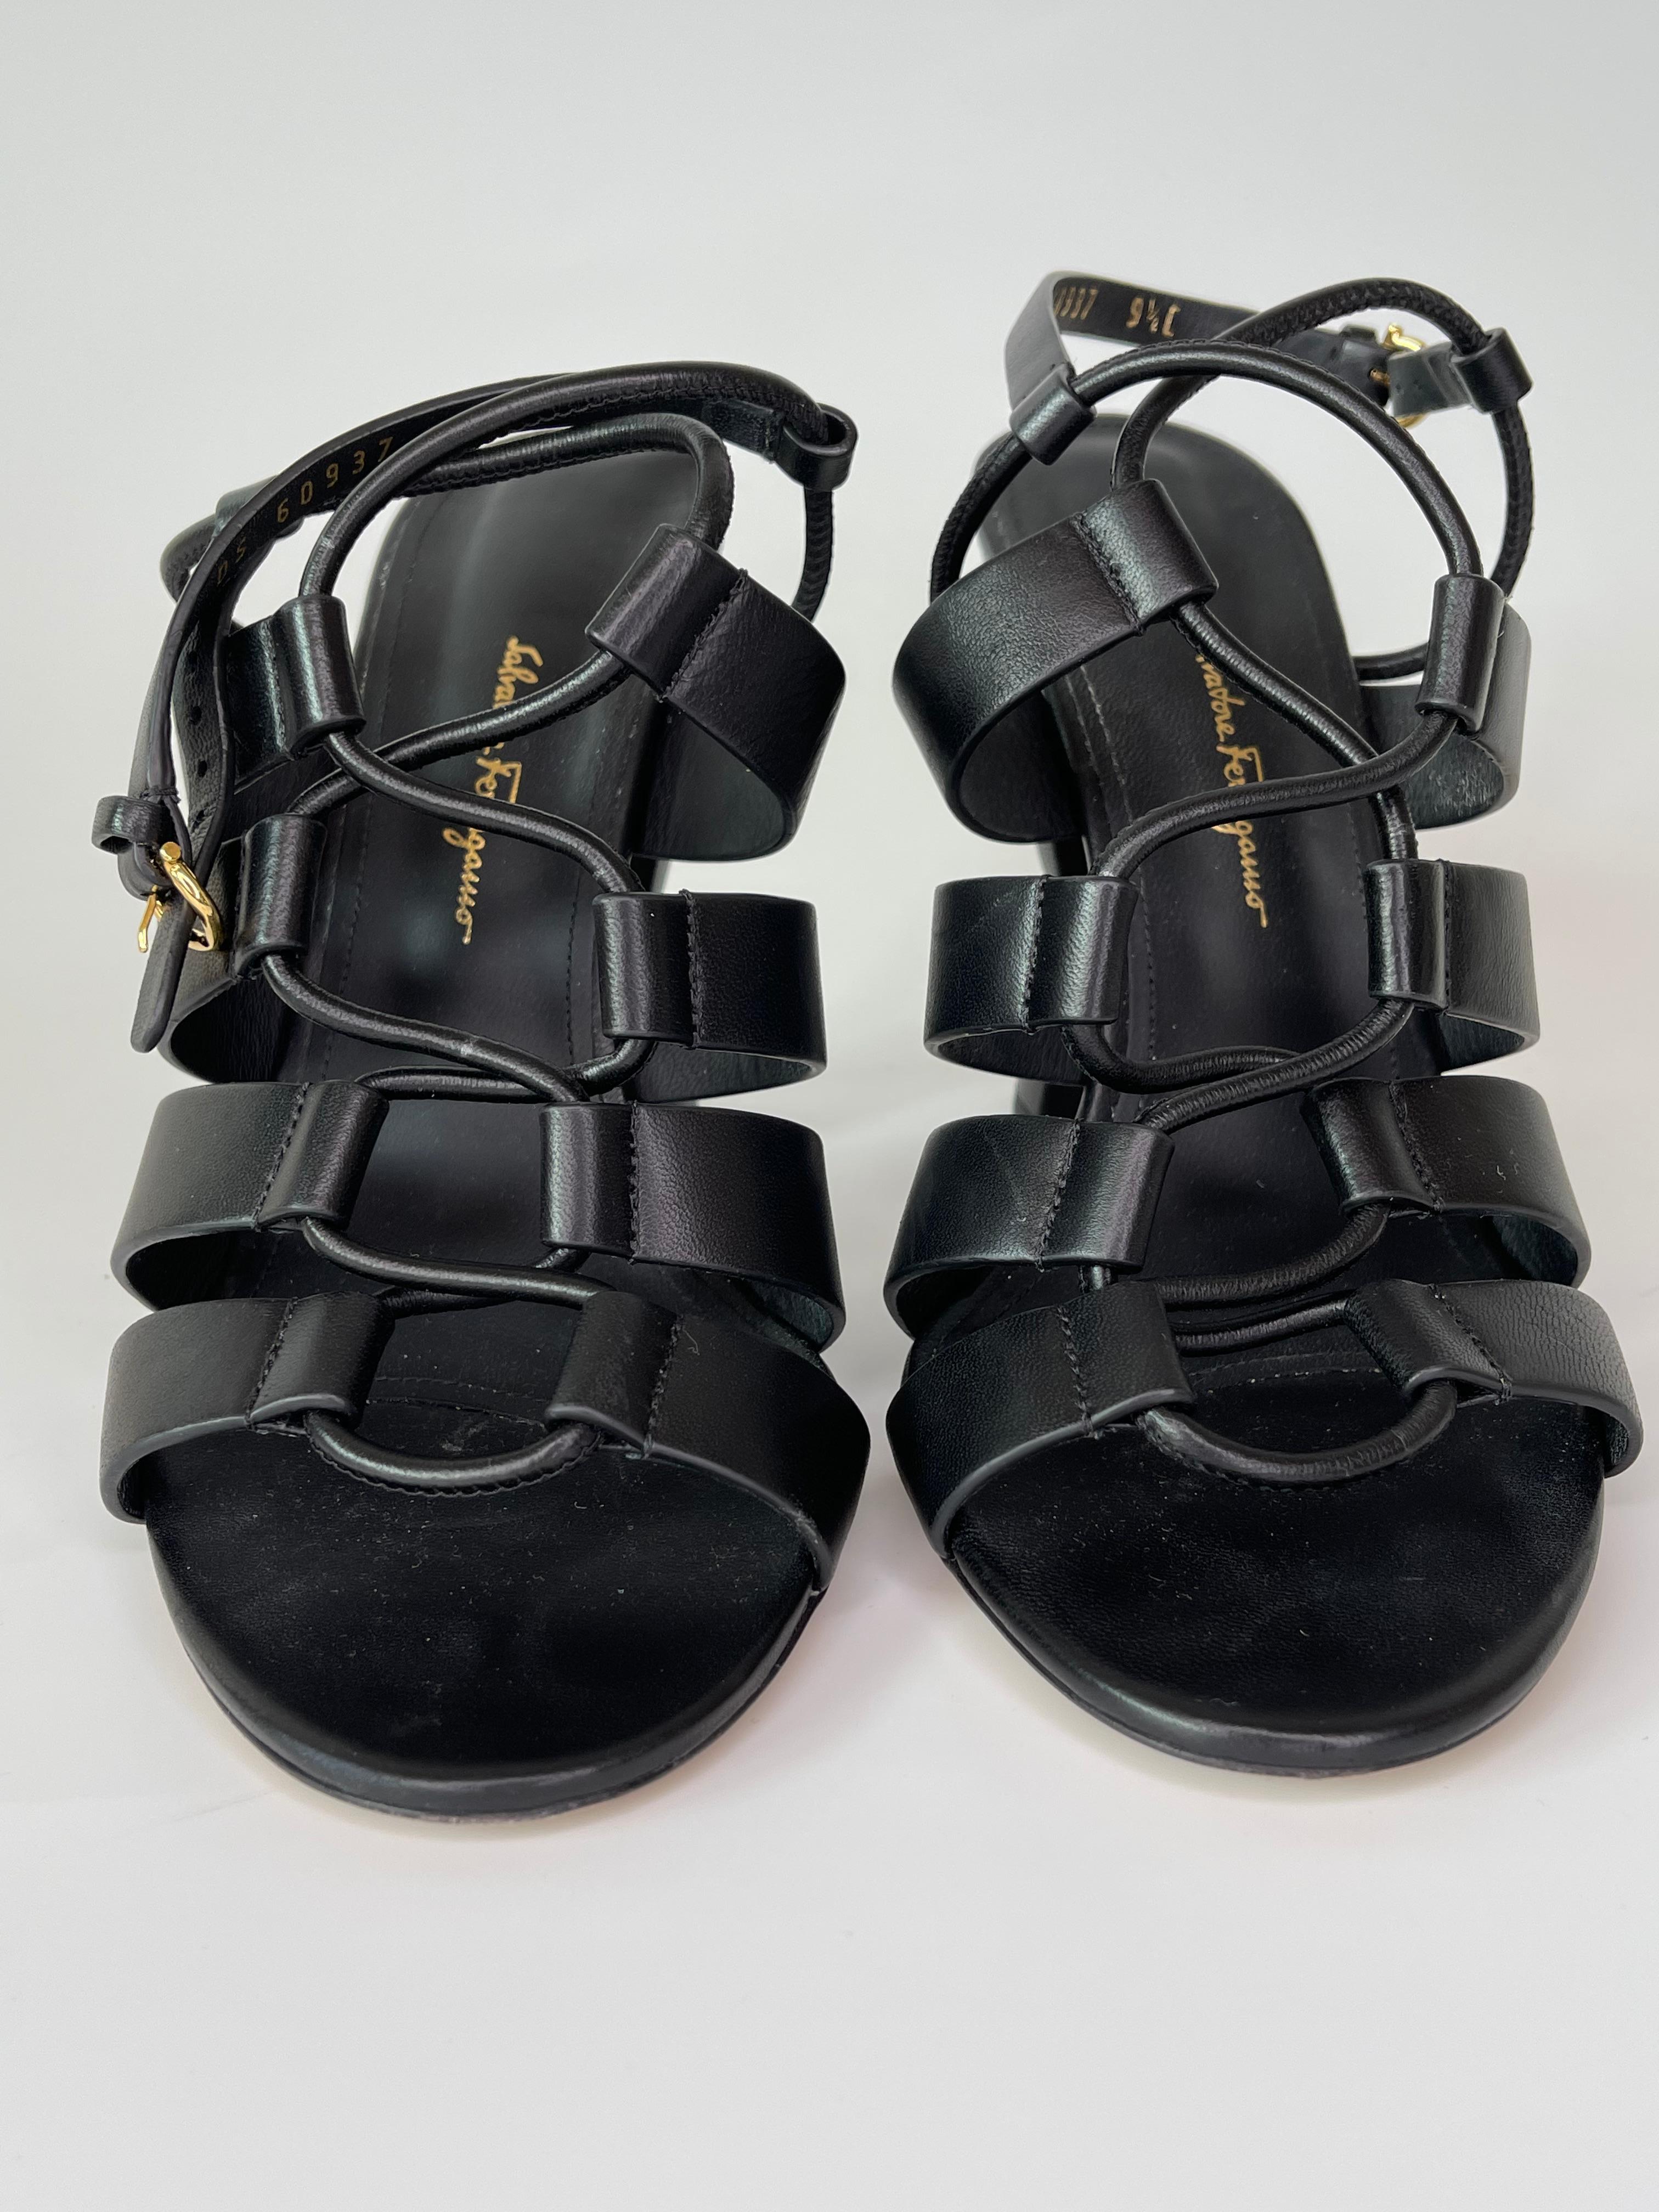 Crafted from leather, these buckle-fastened pair have been designed with multiple straps that make for a chic see through look. This style set favourite creates exquisite footwear in the brand's homeland made to exude timeless style.

COLOR: